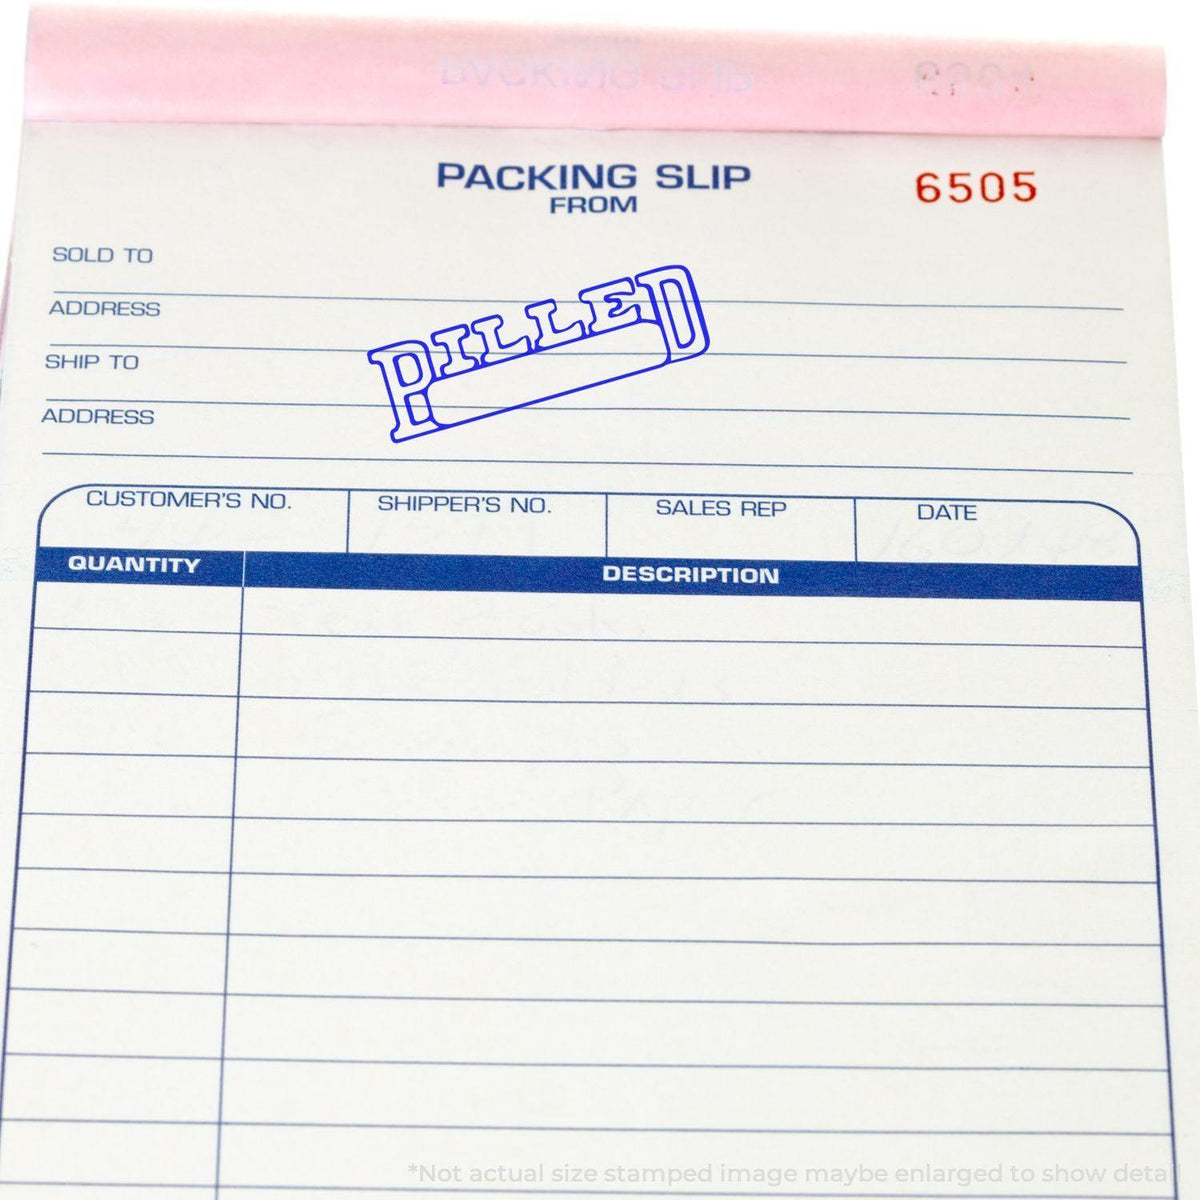 Self-Inking Billed with Date Box Stamp - Engineer Seal Stamps - Brand_Trodat, Impression Size_Small, Stamp Type_Self-Inking Stamp, Type of Use_Accounting, Type of Use_Finance, Type of Use_Office